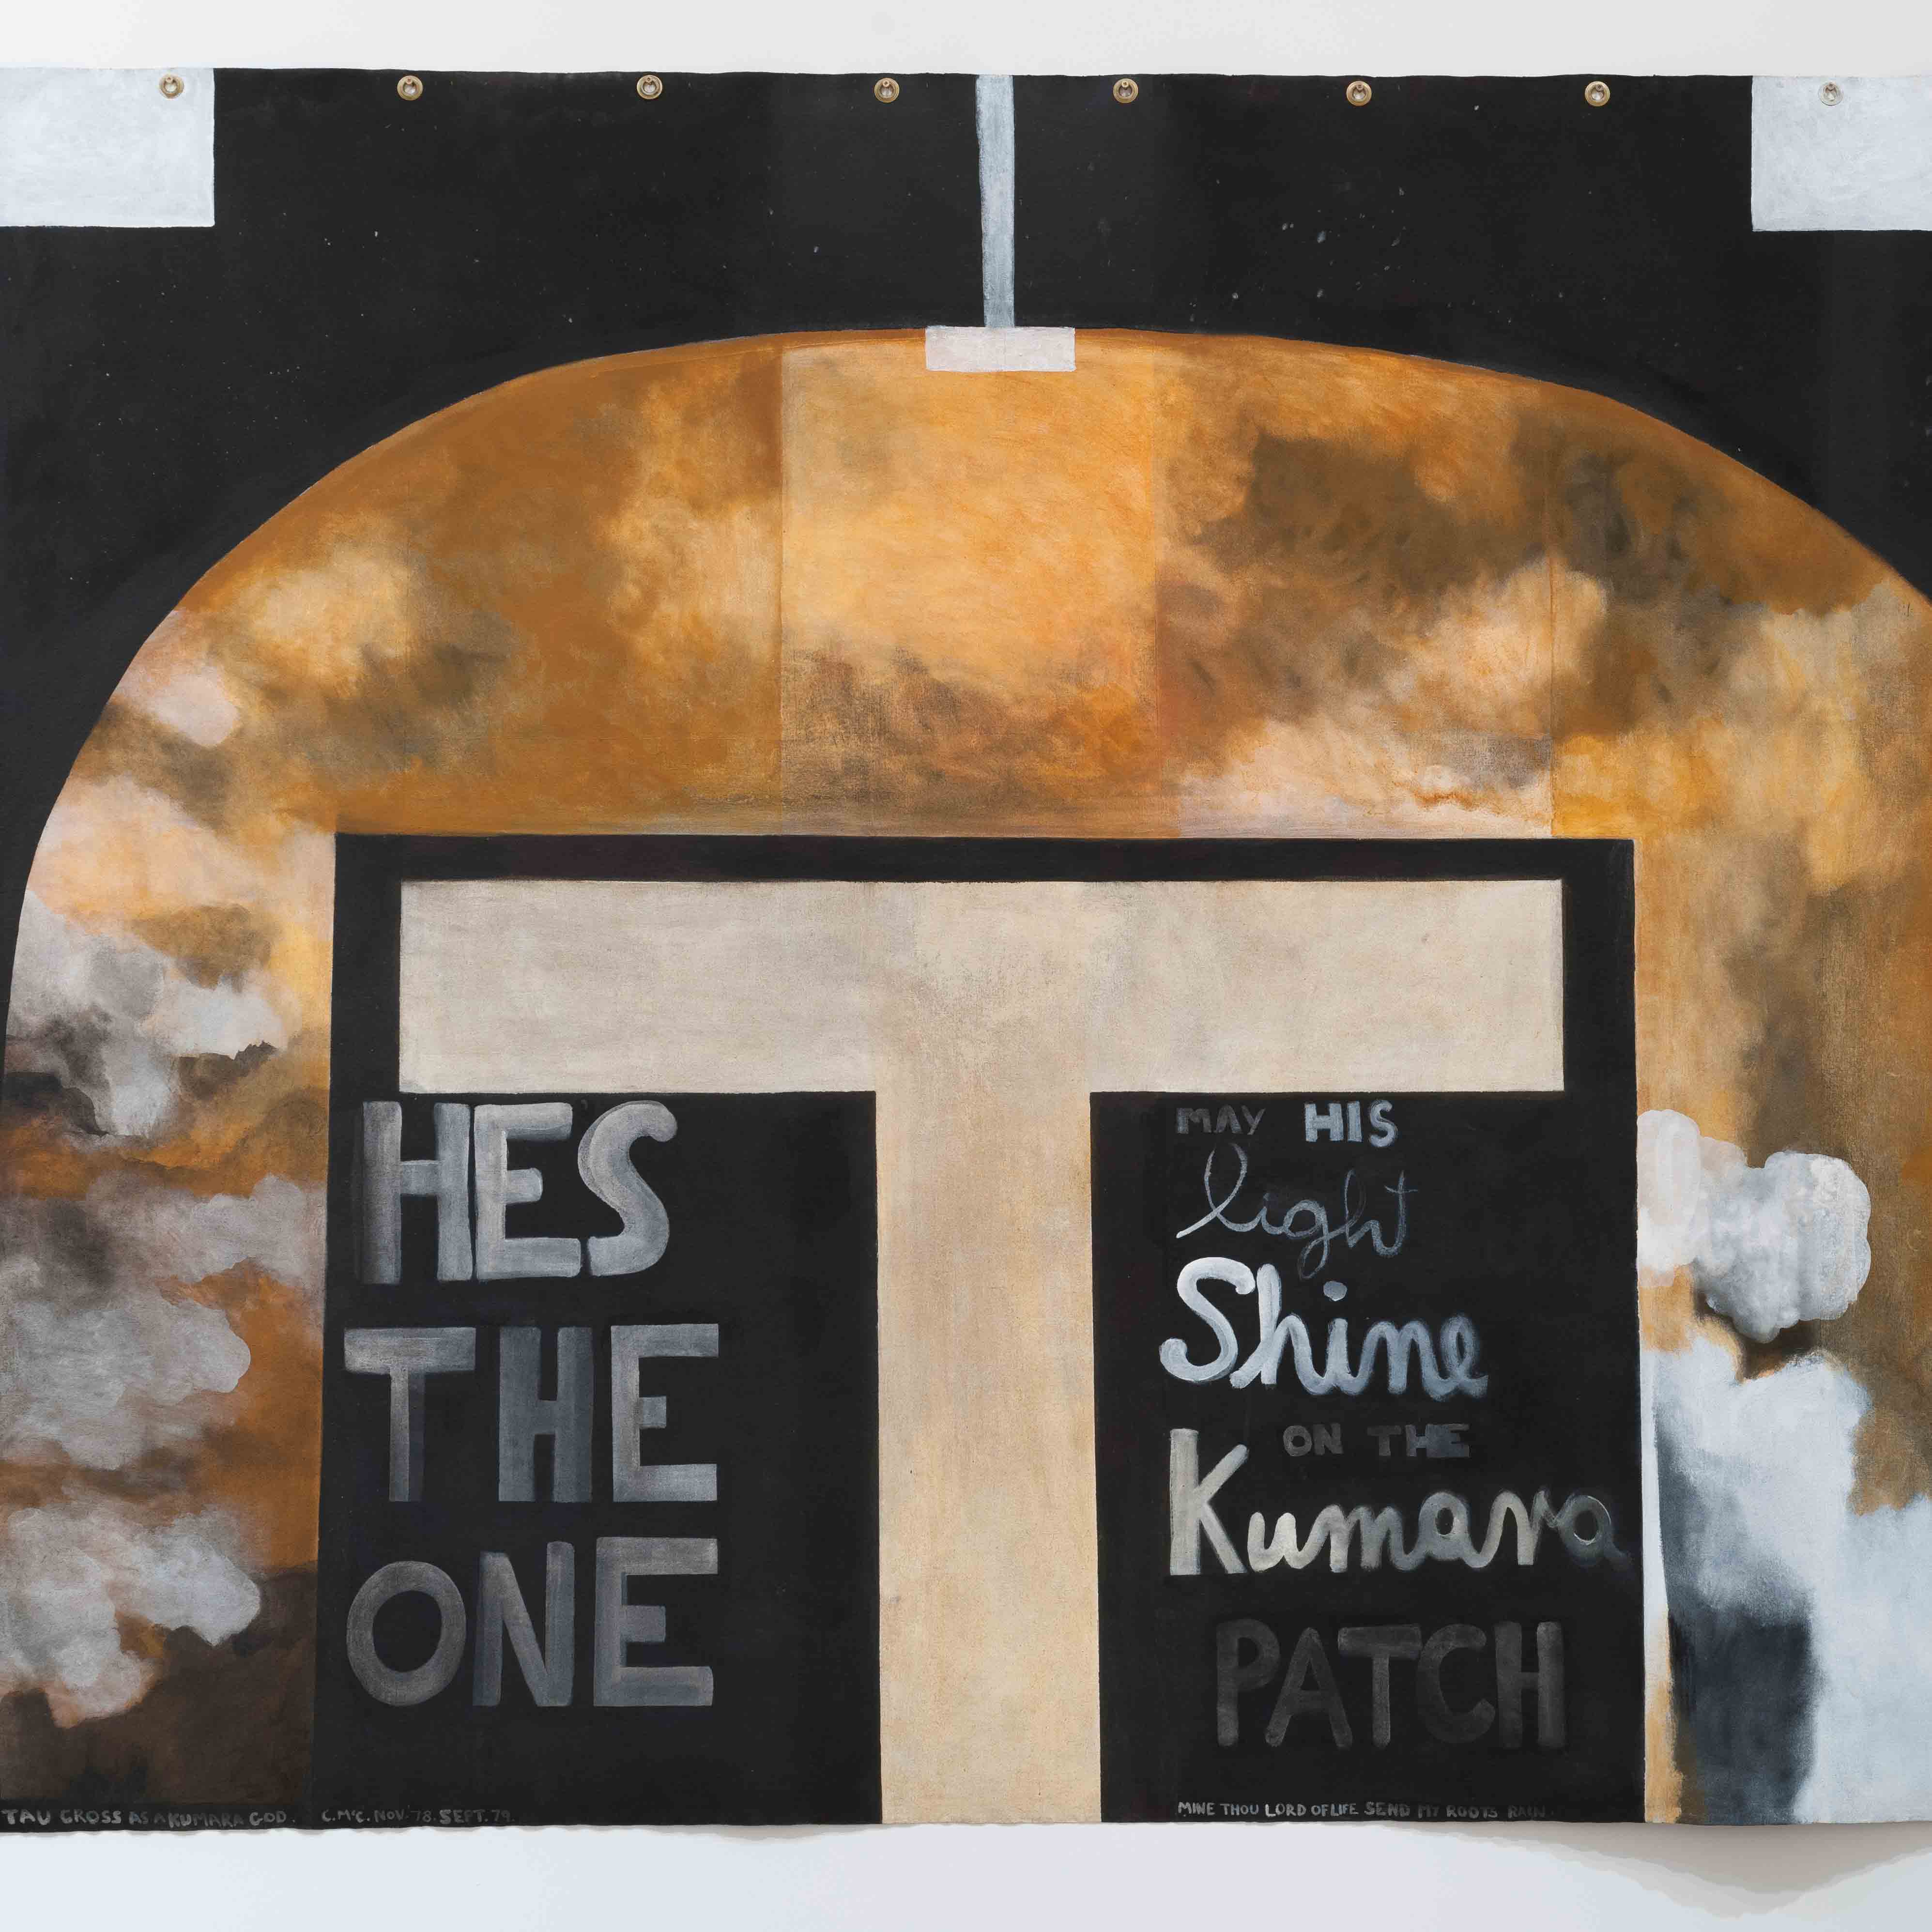 A Place to Paint: Colin McCahon in Auckland  Opens Saturday 10 August at Auckland Art Gallery Image